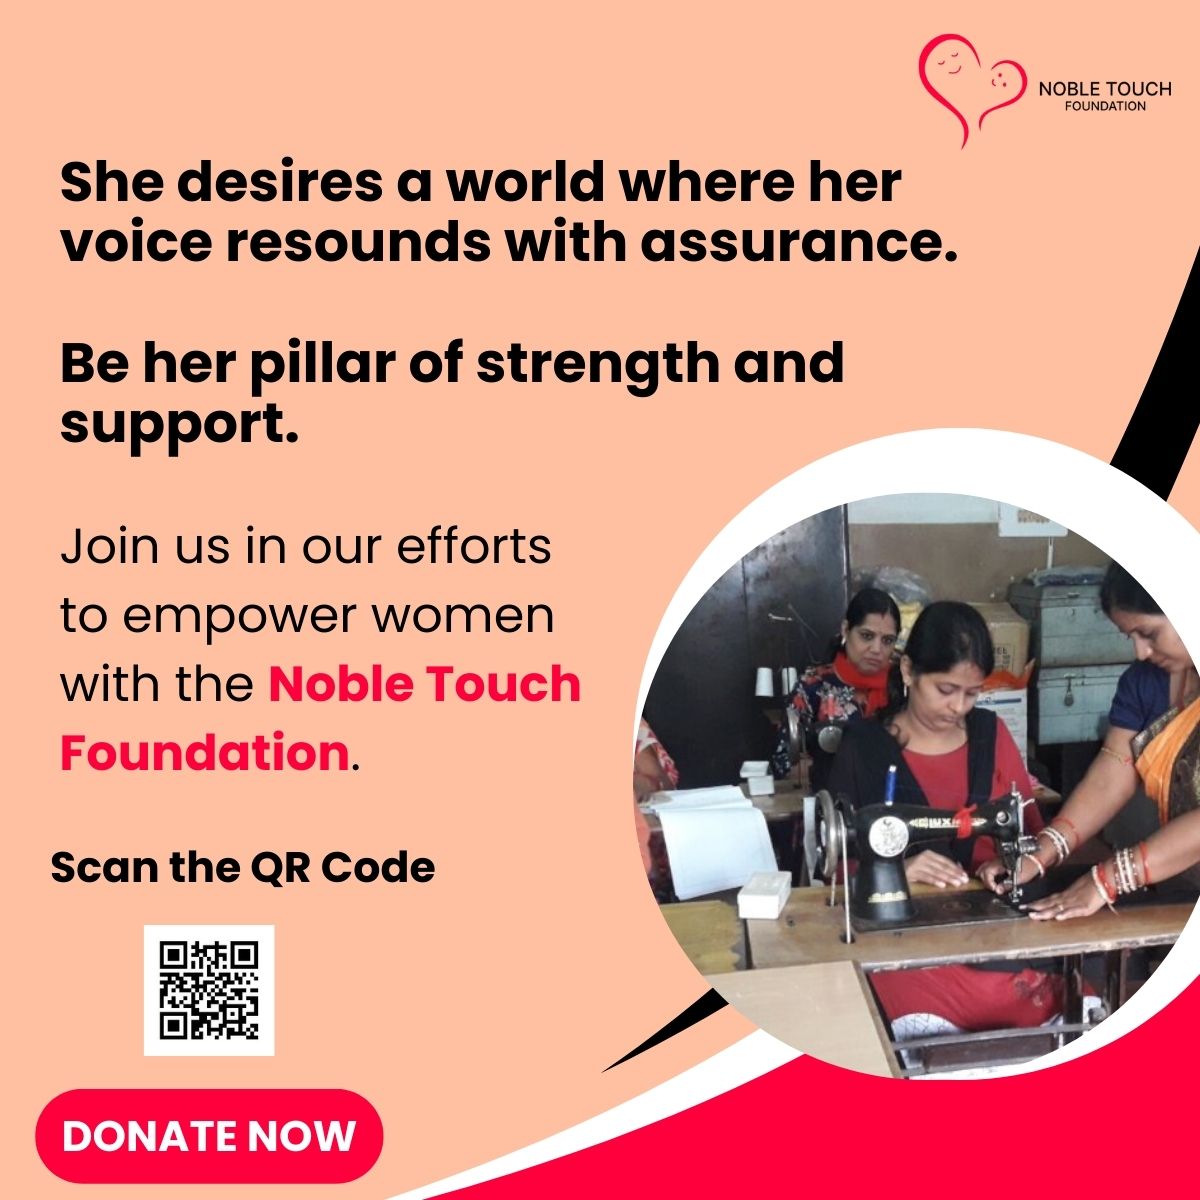 Donate to Support Women to Empower Her Voice. Increase her assurance and boost her confidence.
#EmpoweringWomen #WomenEmpowerment #SupportHerVoice #StrengthInUnity #BreakingBarriers #WomenAchievers #EqualityMatters #InspireChange #WomenLeadership #StandWithHer #GenderEquality